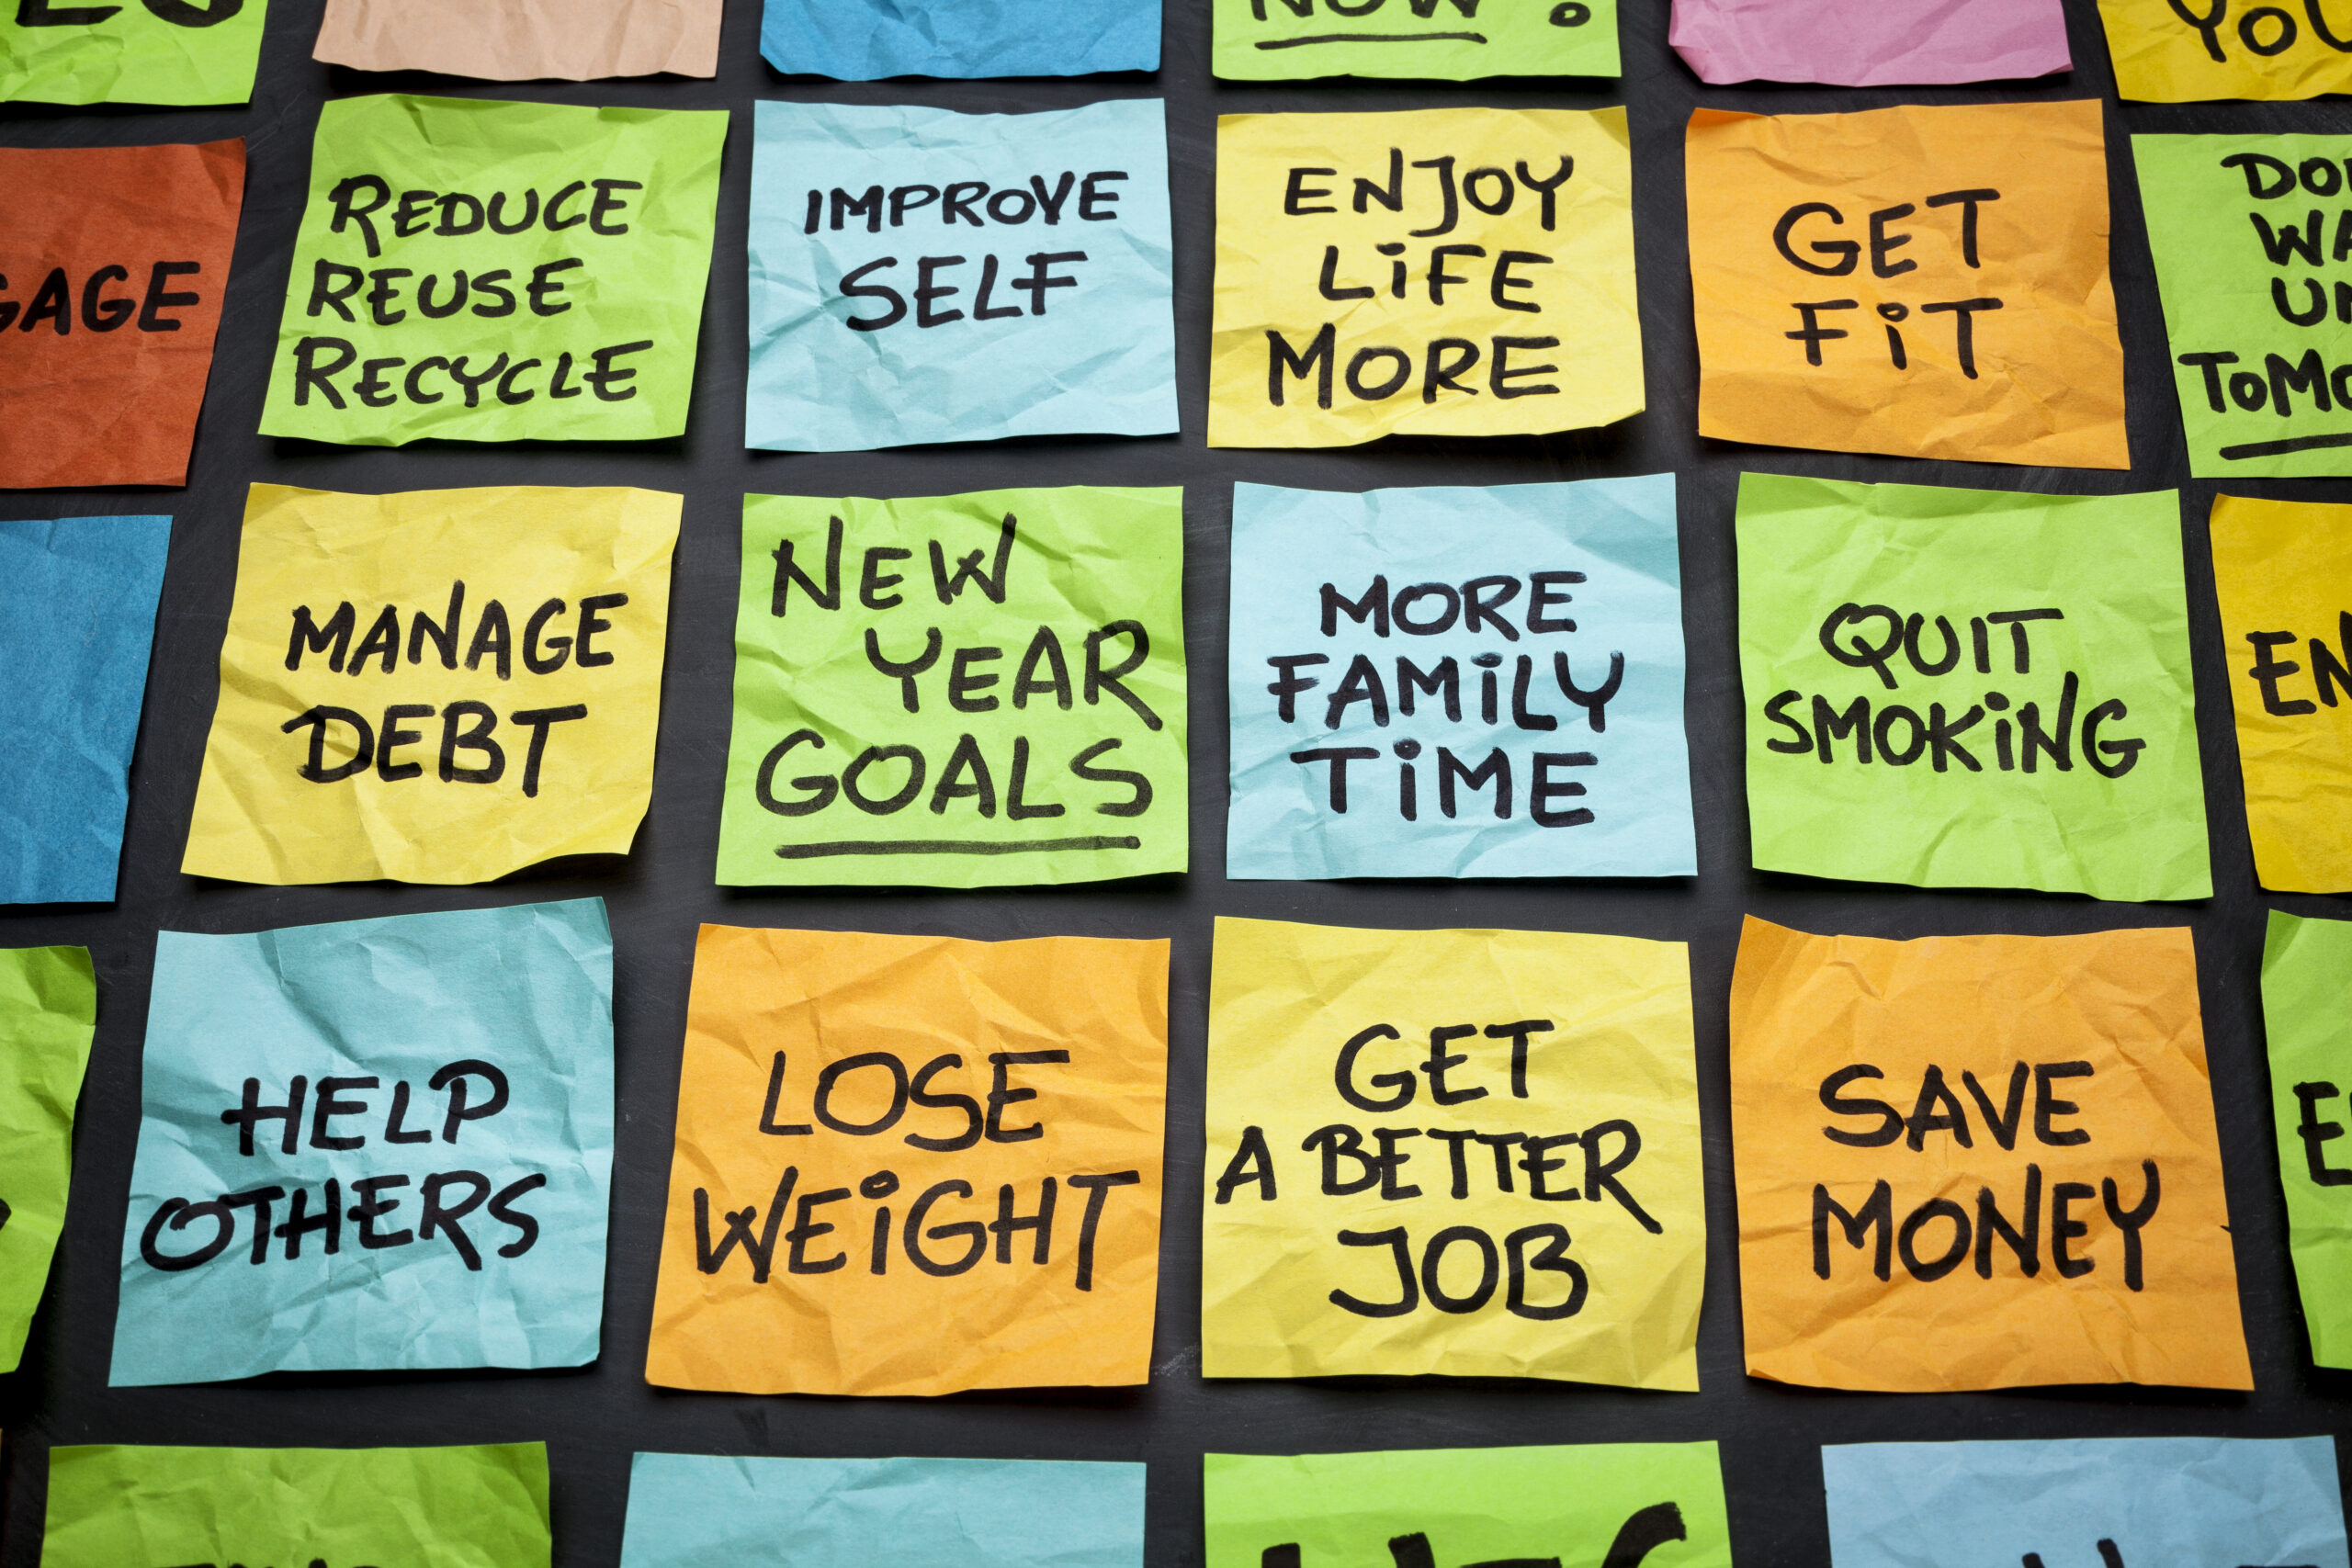 There’s Still Time to Reboot Lapsed Resolutions